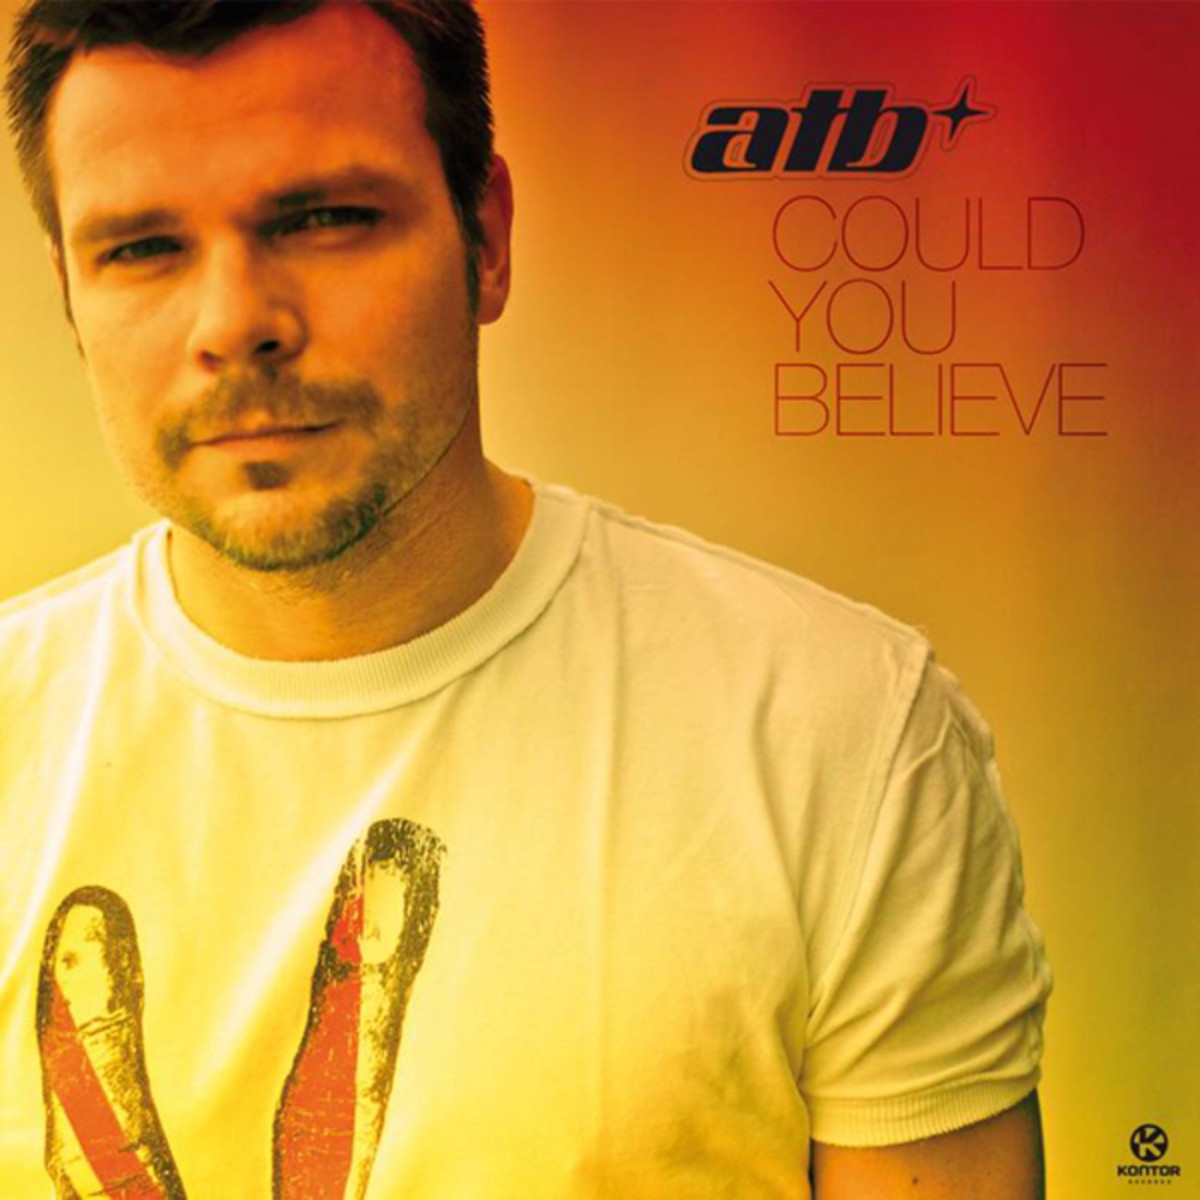 Could You Believe - Taylor & Gallahan Remix